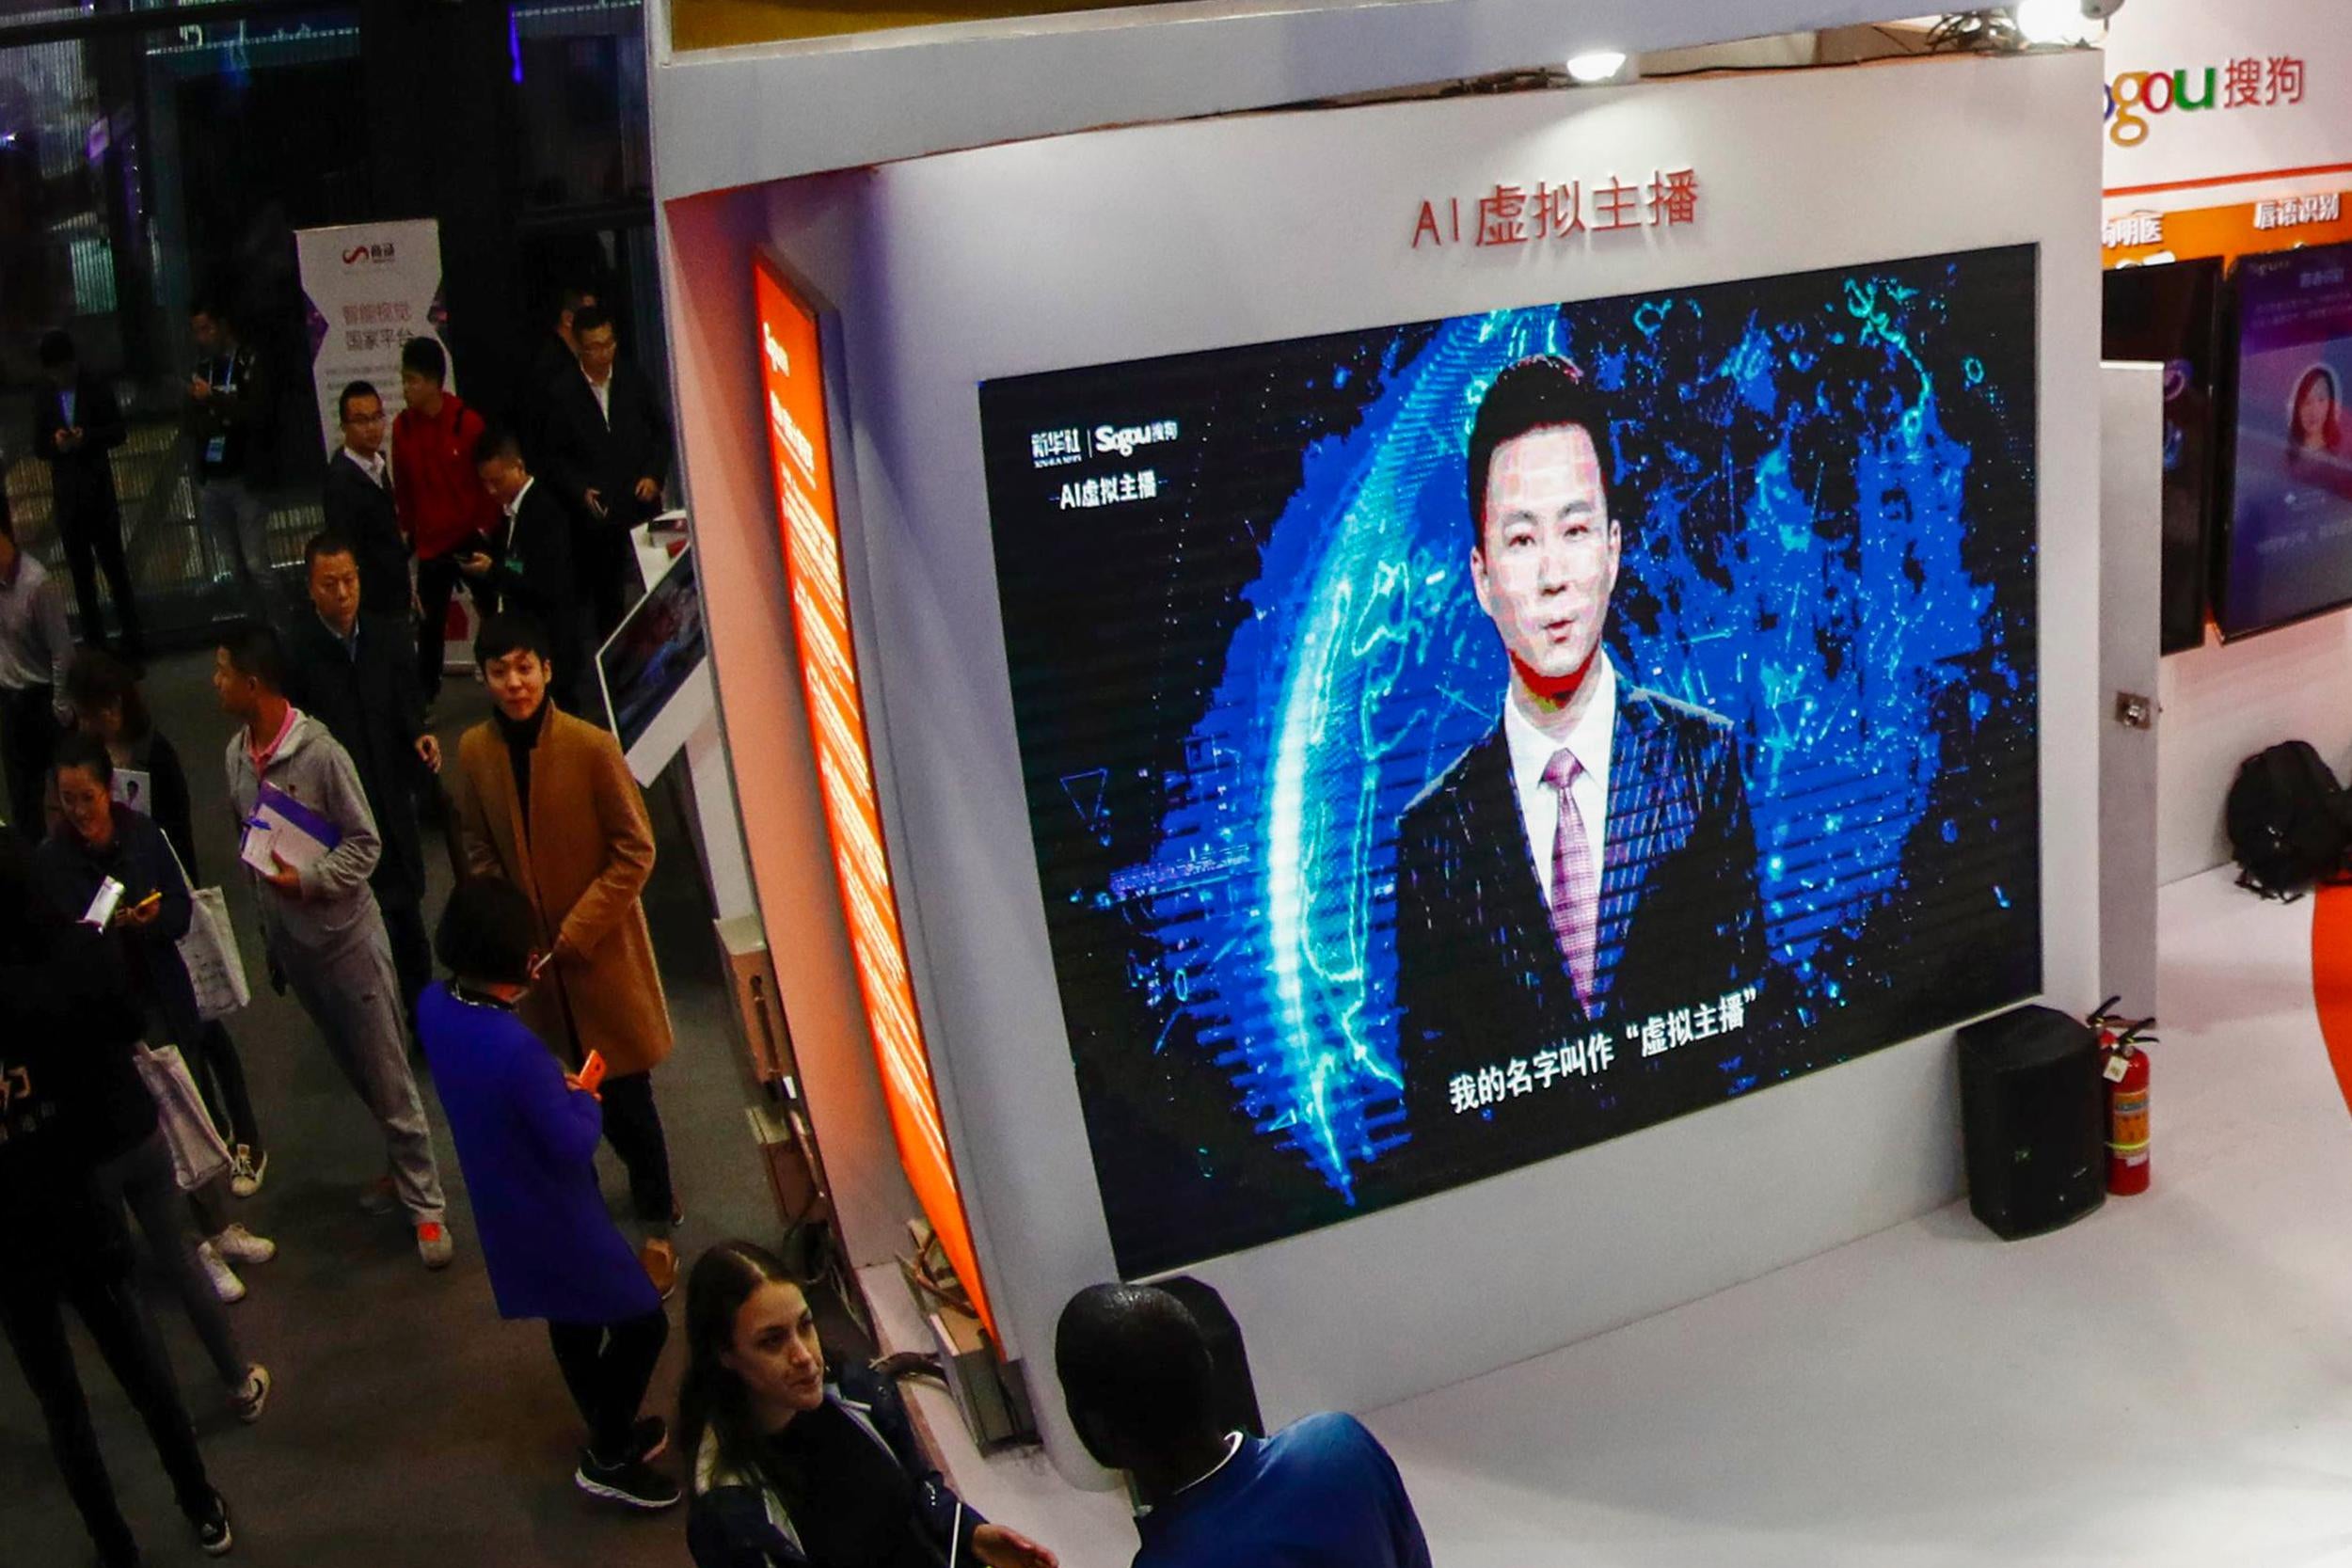 A screen shows an artificial intelligence news anchor introducing himself at the Light of Internet Expo during the 5th World Internet Conference in Wuzhen in China's eastern Zhejiang province.